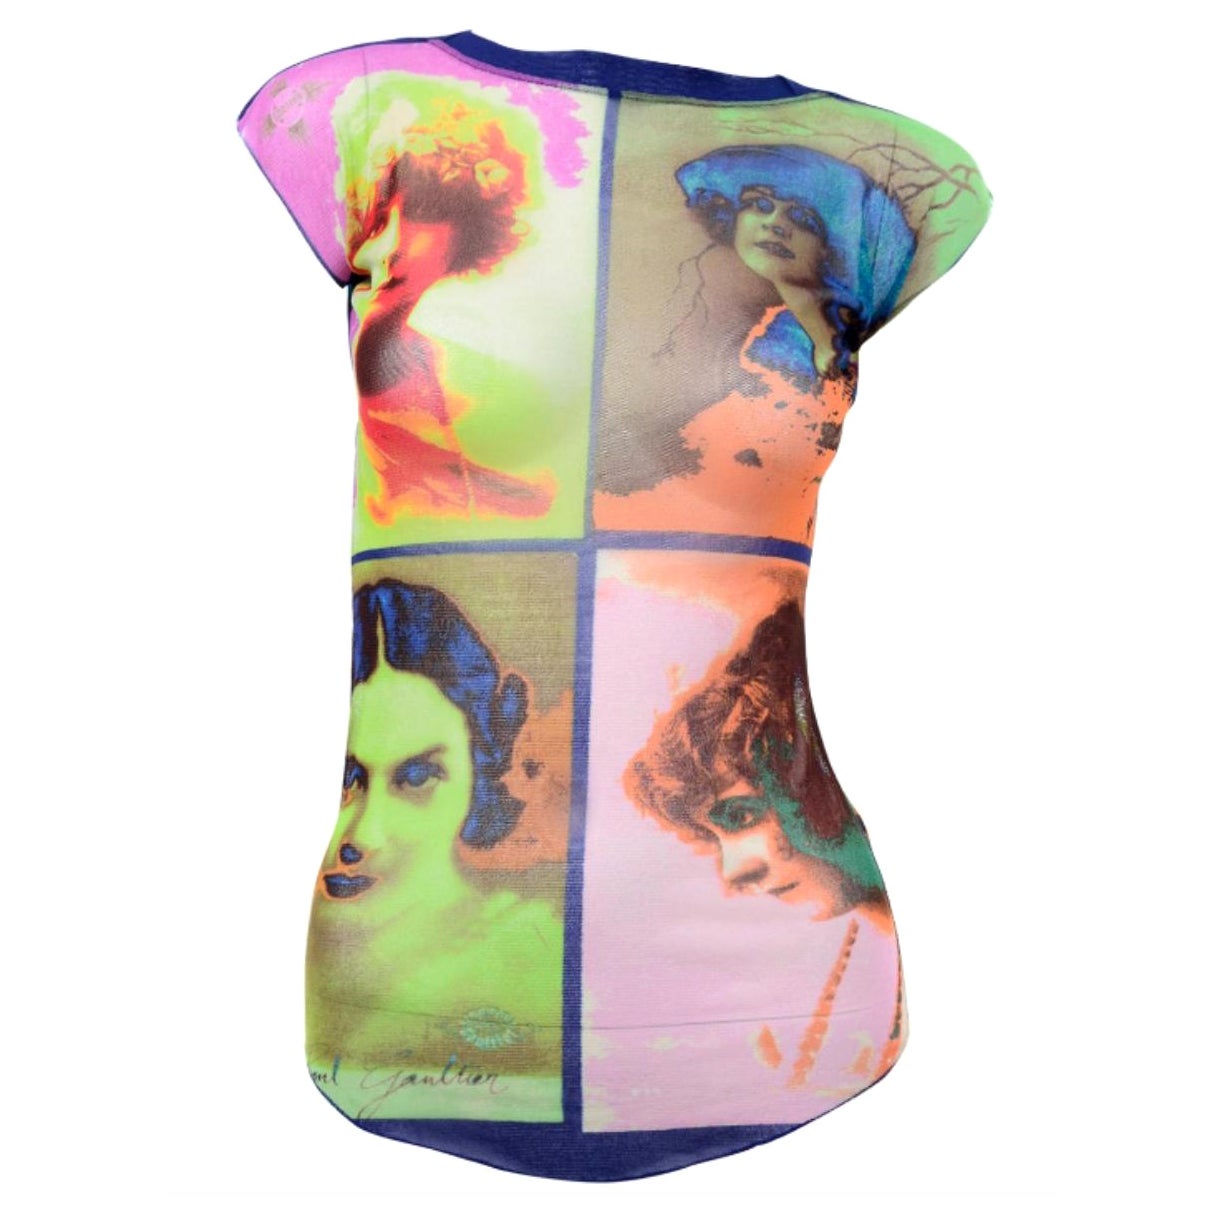 Jean Paul Gaultier Kylie Jenner Kim Mesh Portrait Saturated Faces Top Shirt Tee For Sale